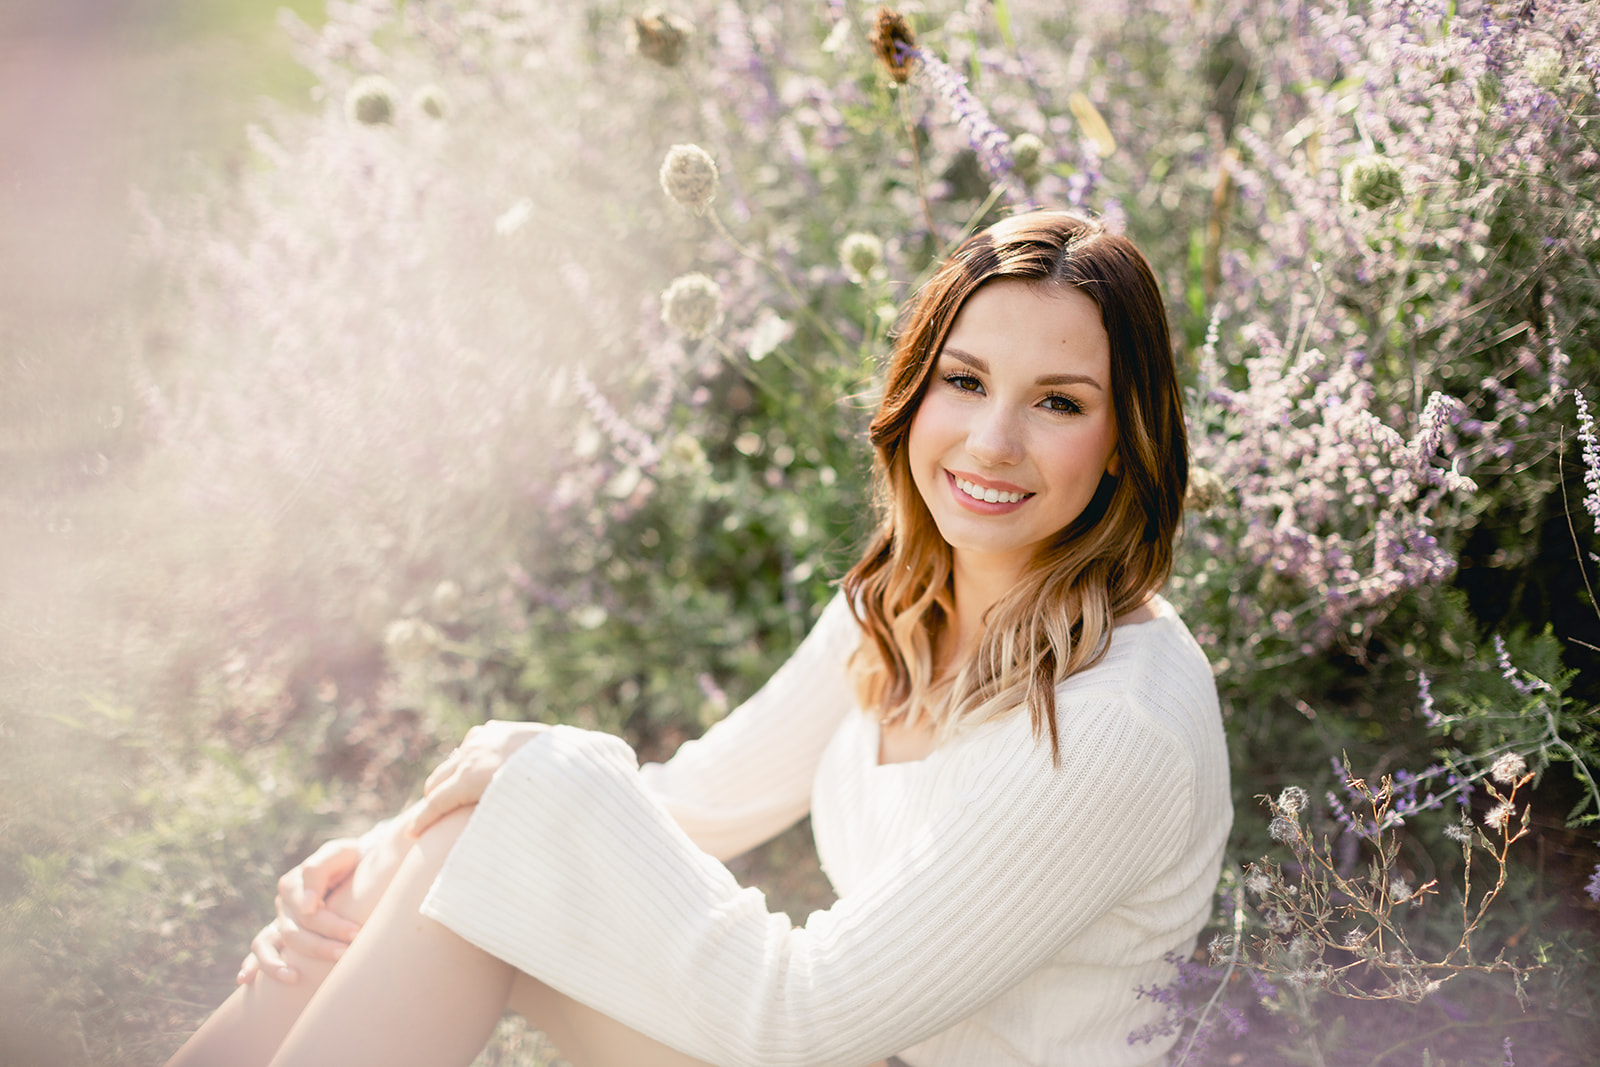 Megan in the wildflowers at Stony Creek Metropark for her senior photoshoot